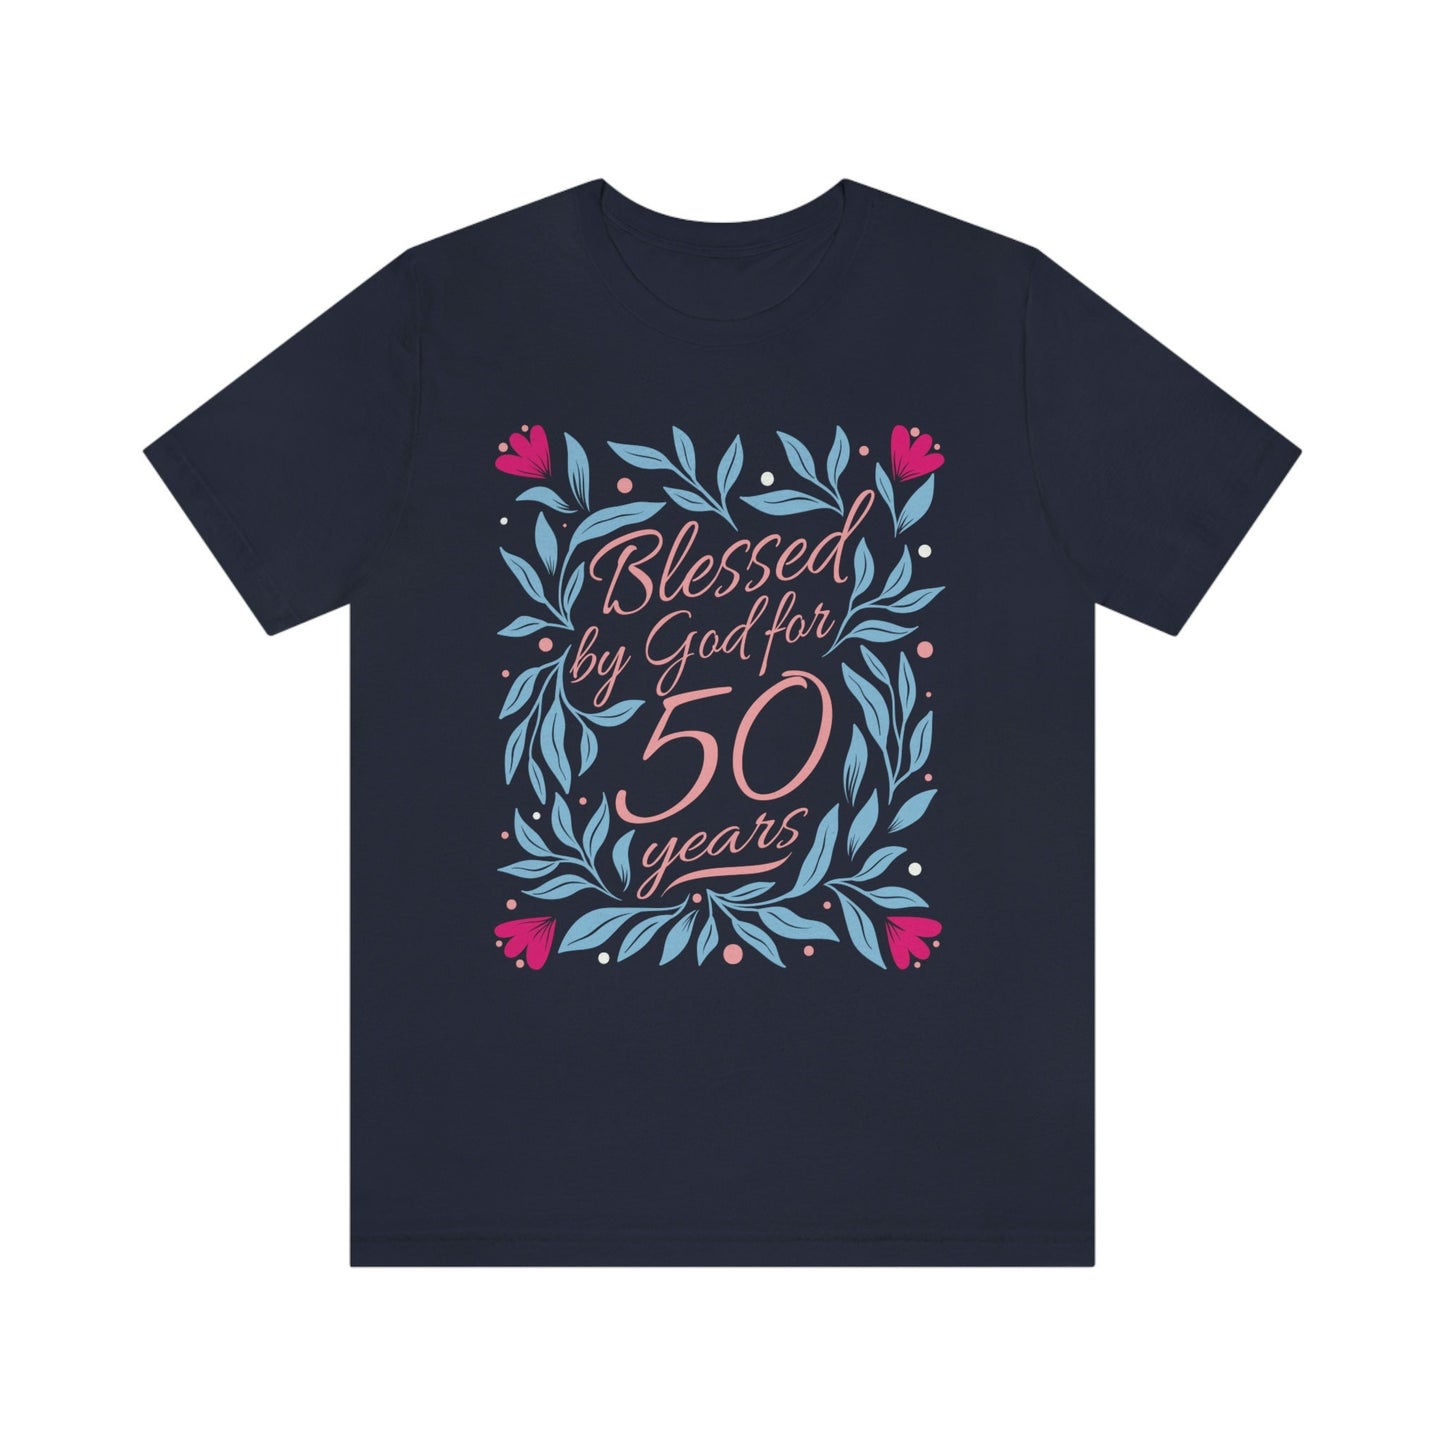 Blessed by God for 50 years gift t-shirt for women or wife